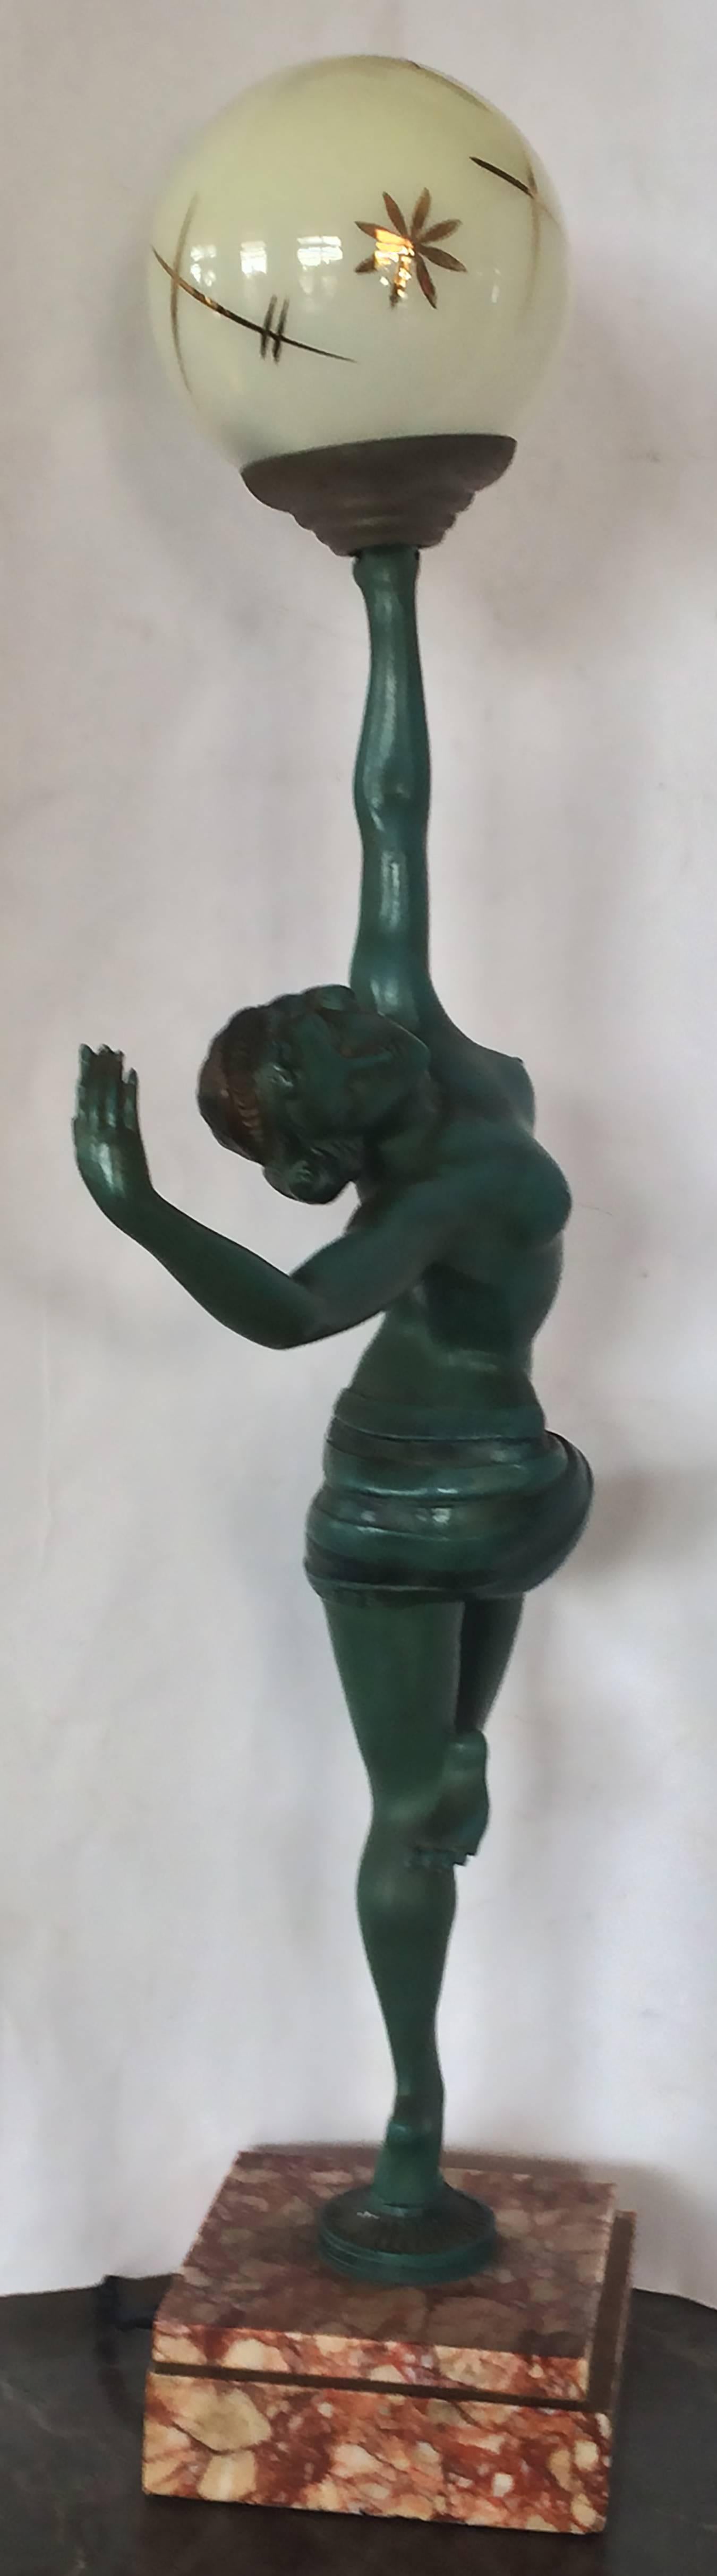 French Art Deco Nude Dancer Lamp by Molins-Balleste 3